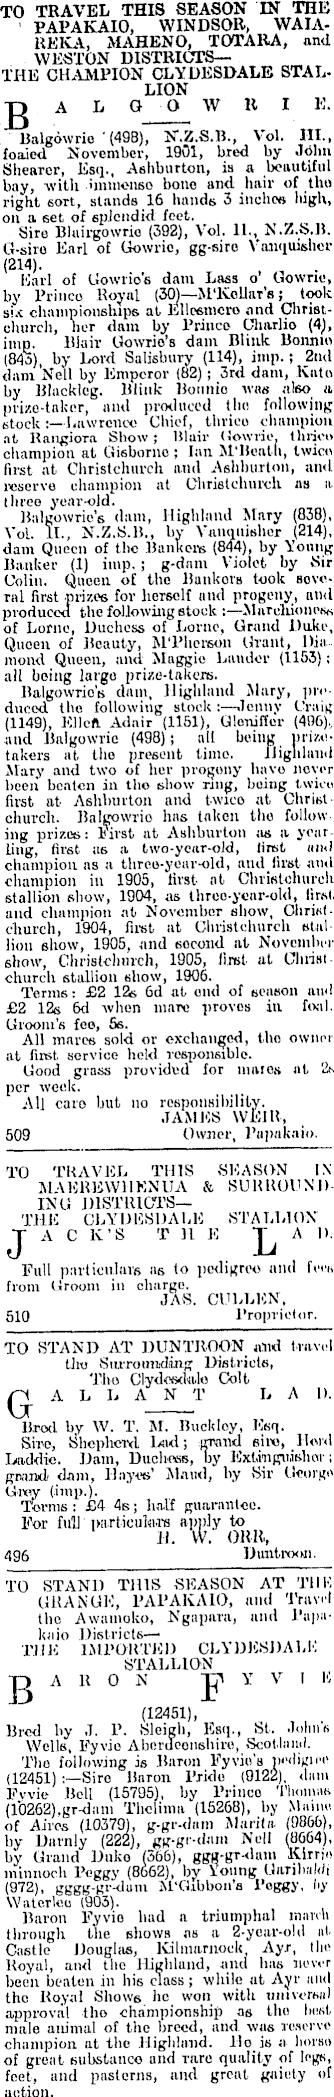 Past | | Oamaru Mail | 3 October 1907 | Page 4 Advertisements Column 7